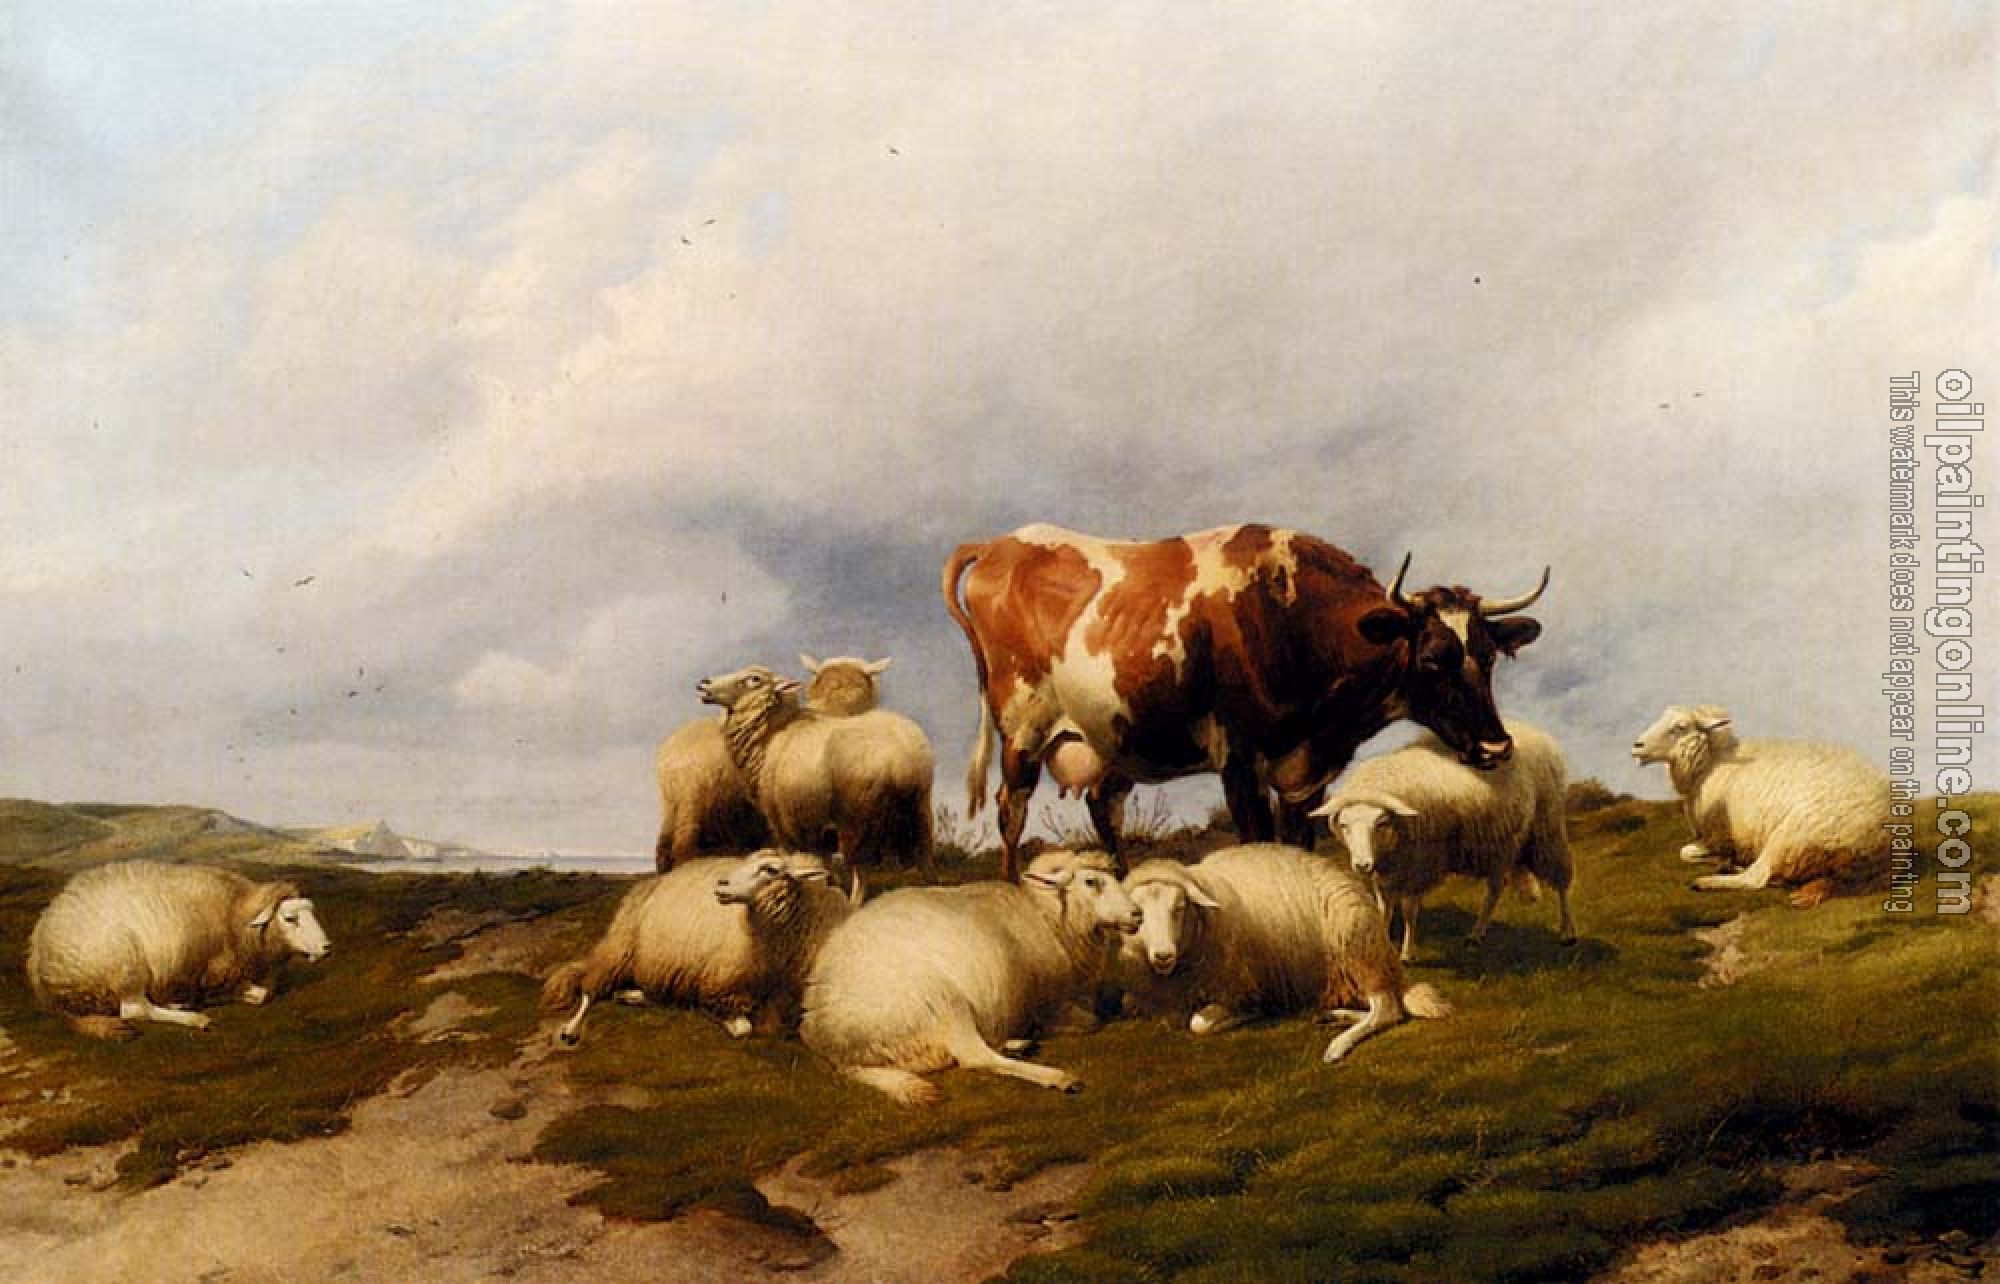 Thomas Sidney Cooper - A Cow And Sheep On The Cliffs